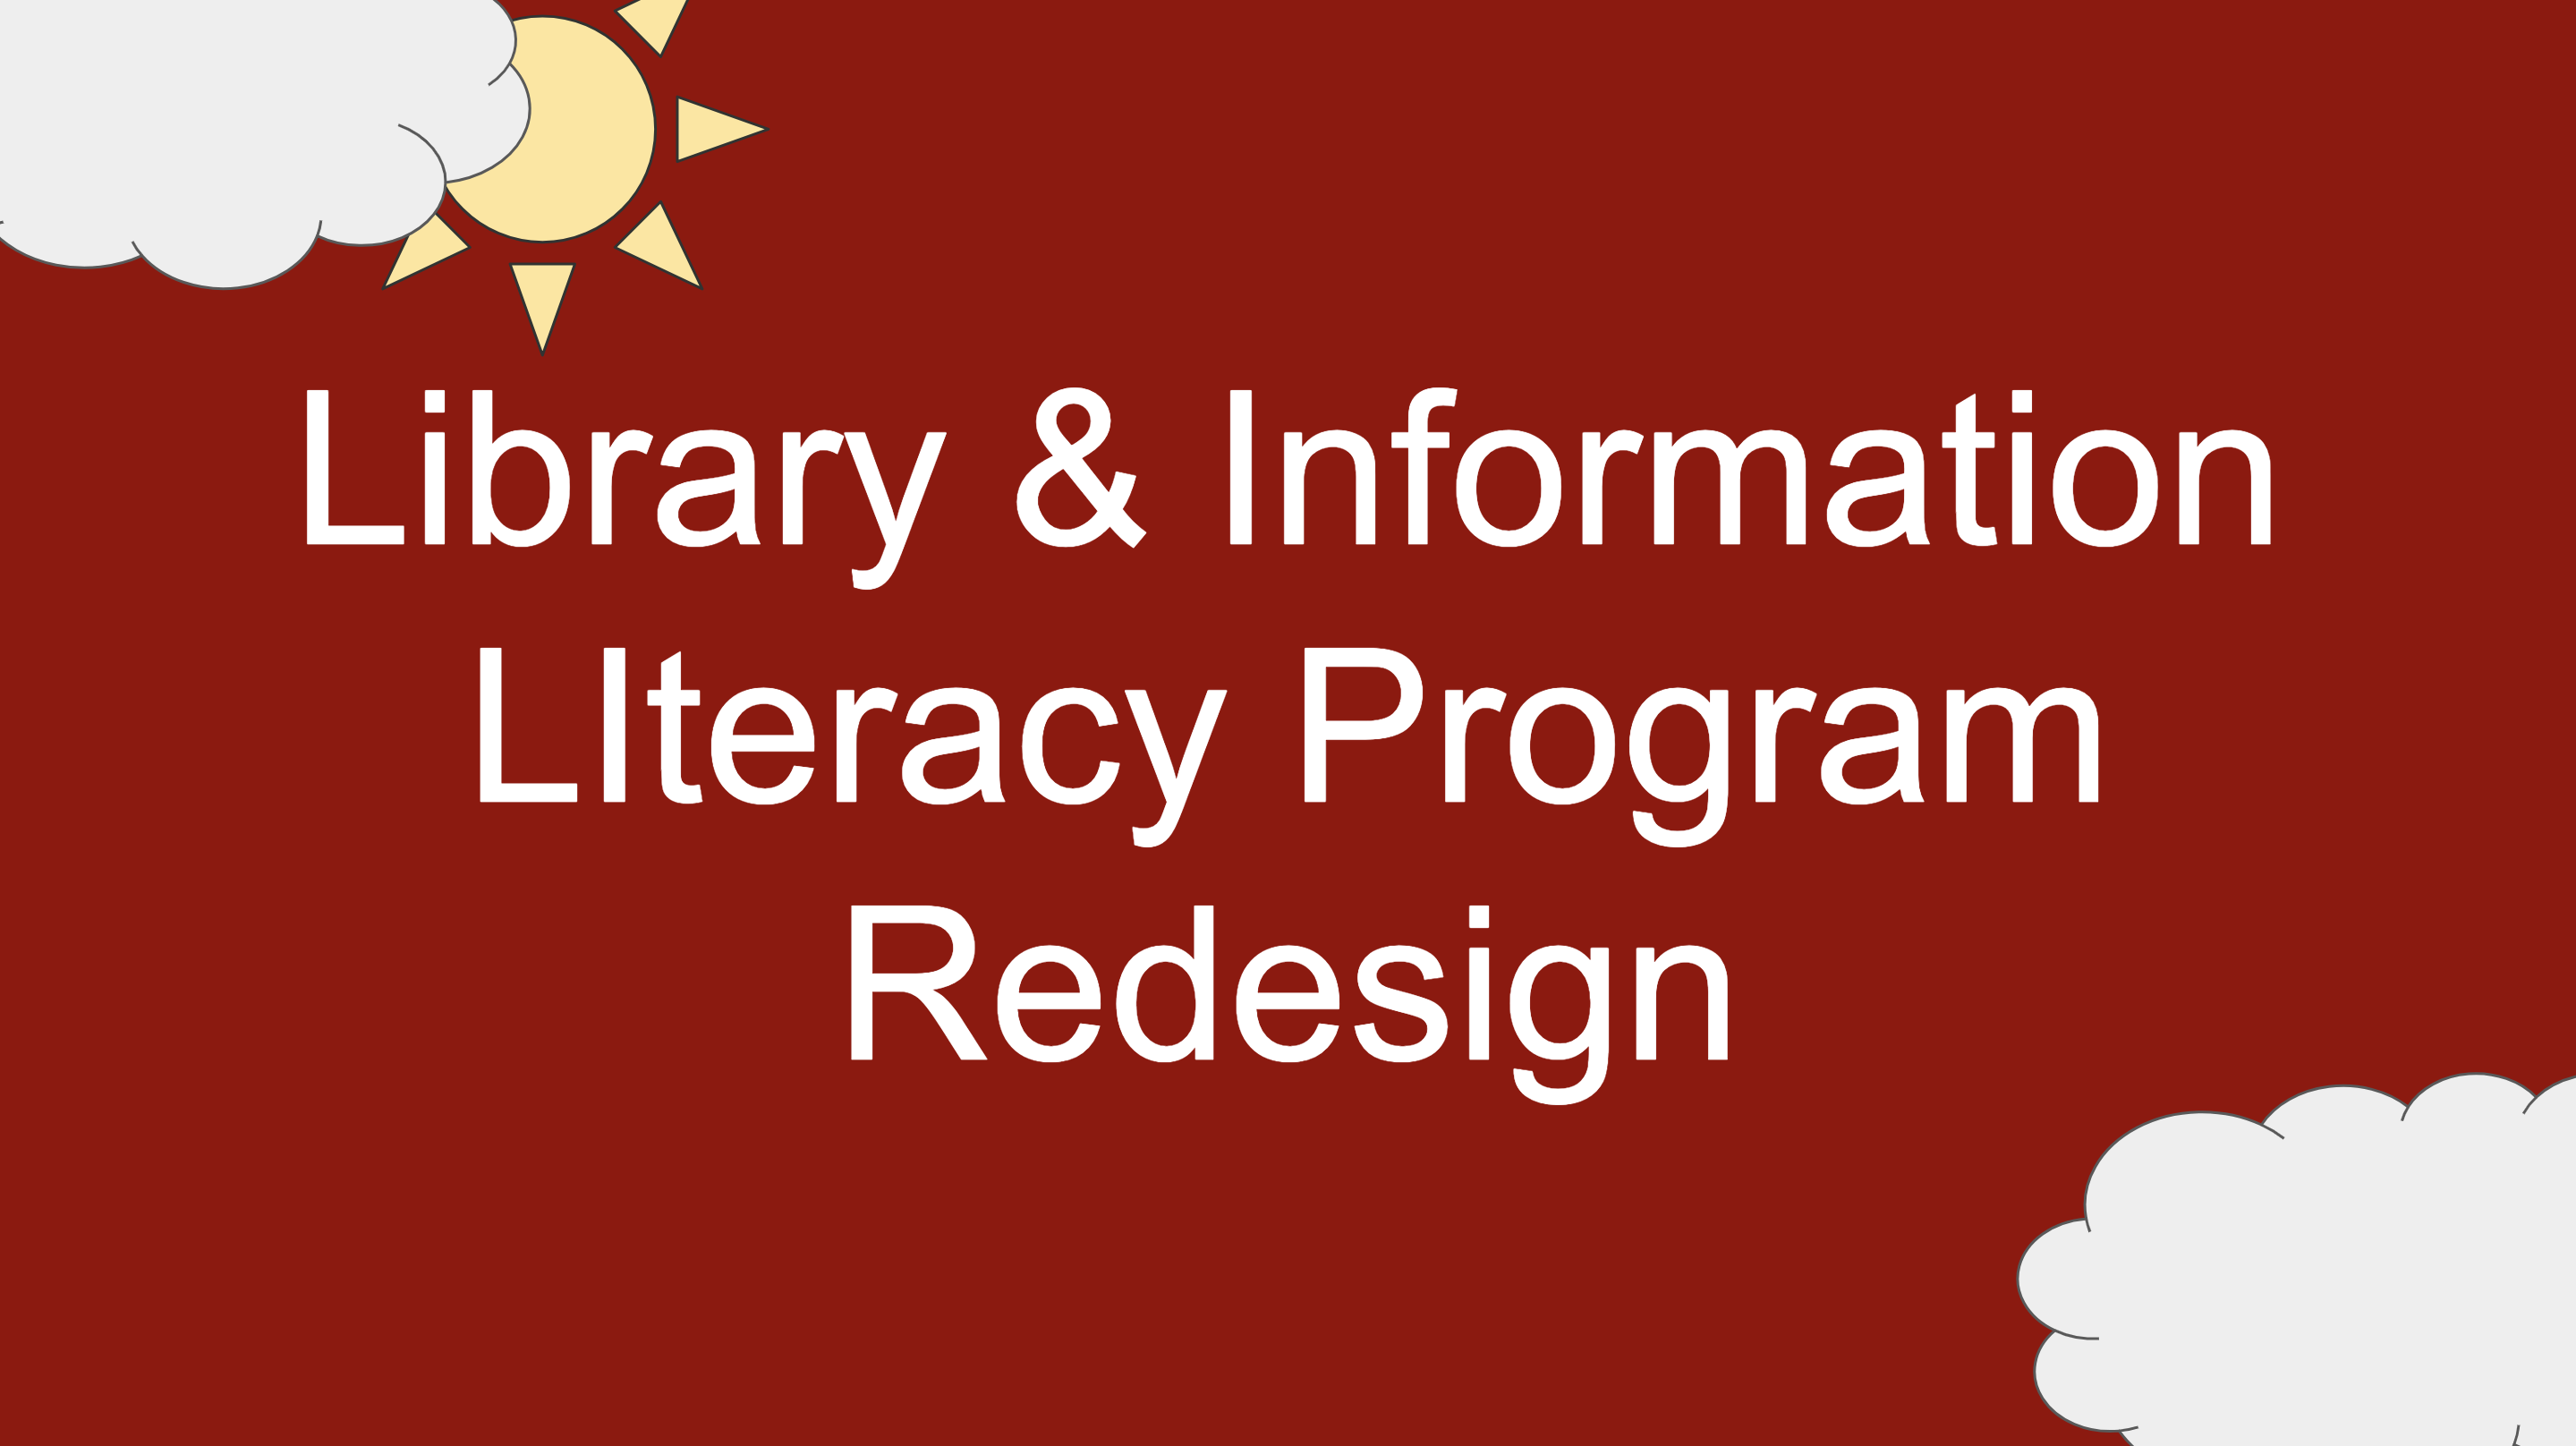 A link to a slidedeck showcasing all of the updates to the district's library program